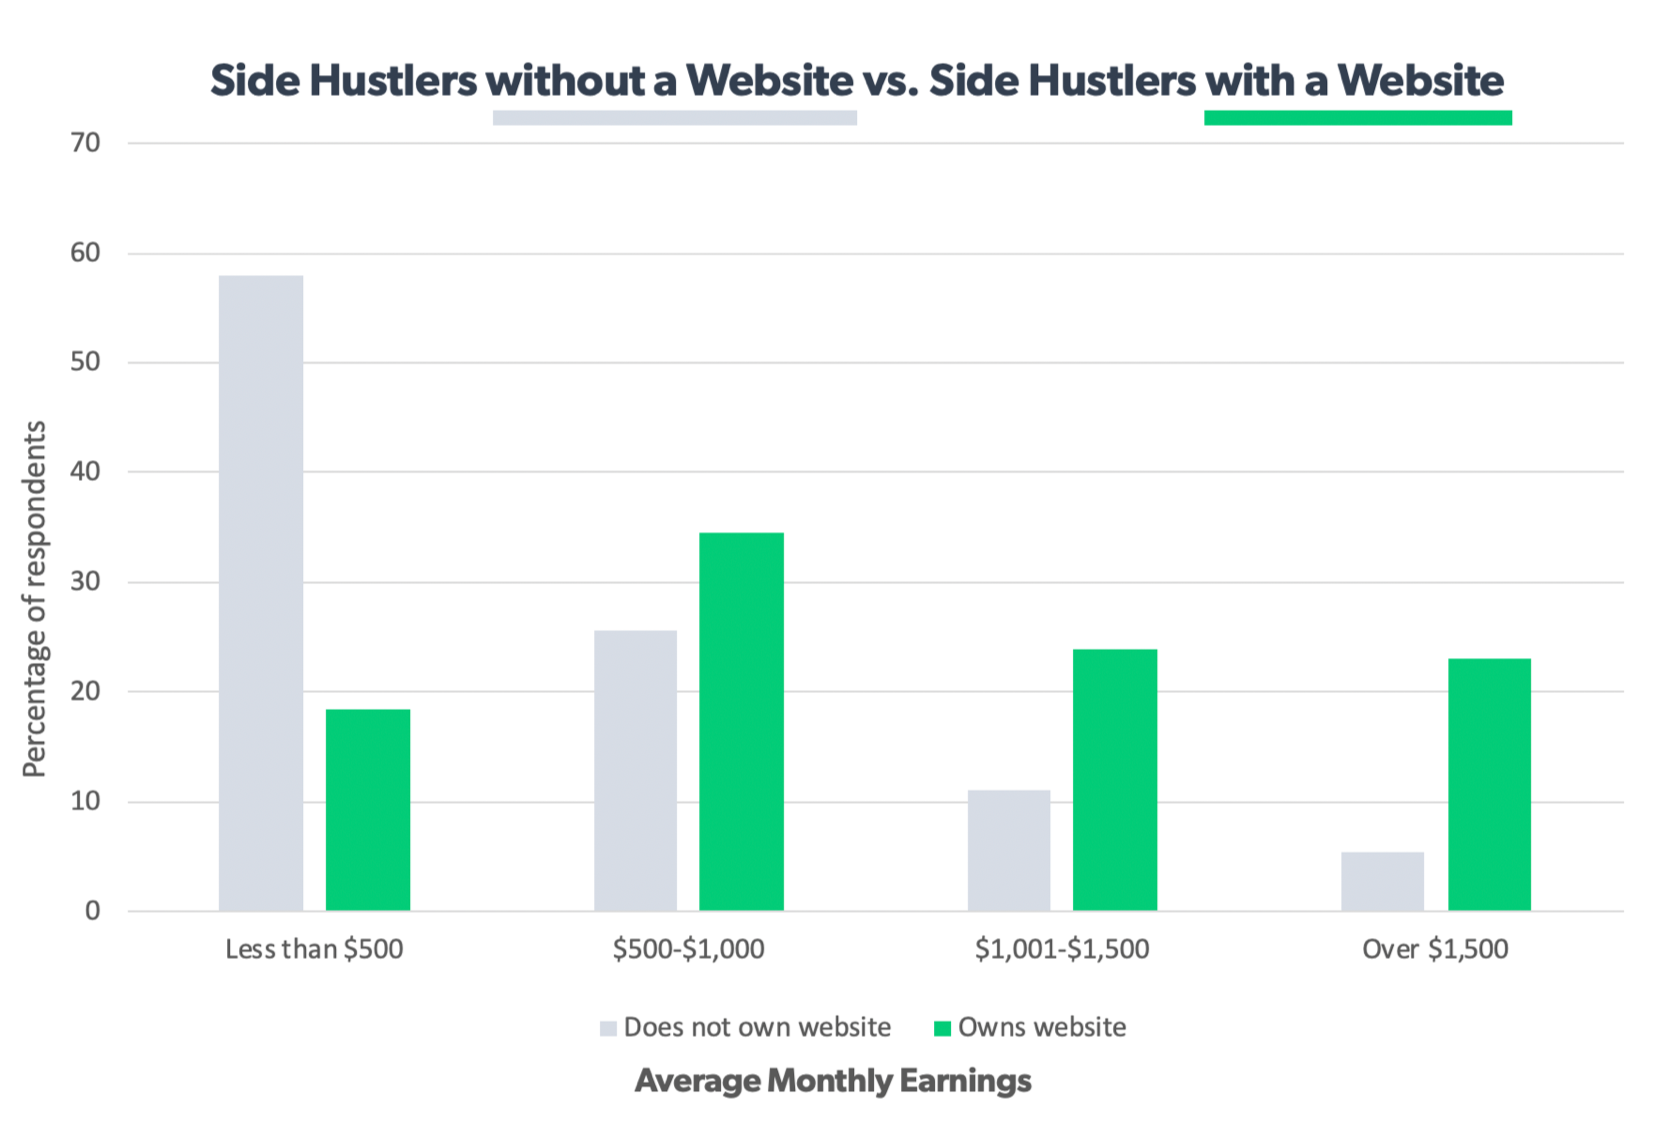 A chart showing that side fraudsters with a website earn those who don’t have a website to promote their services.